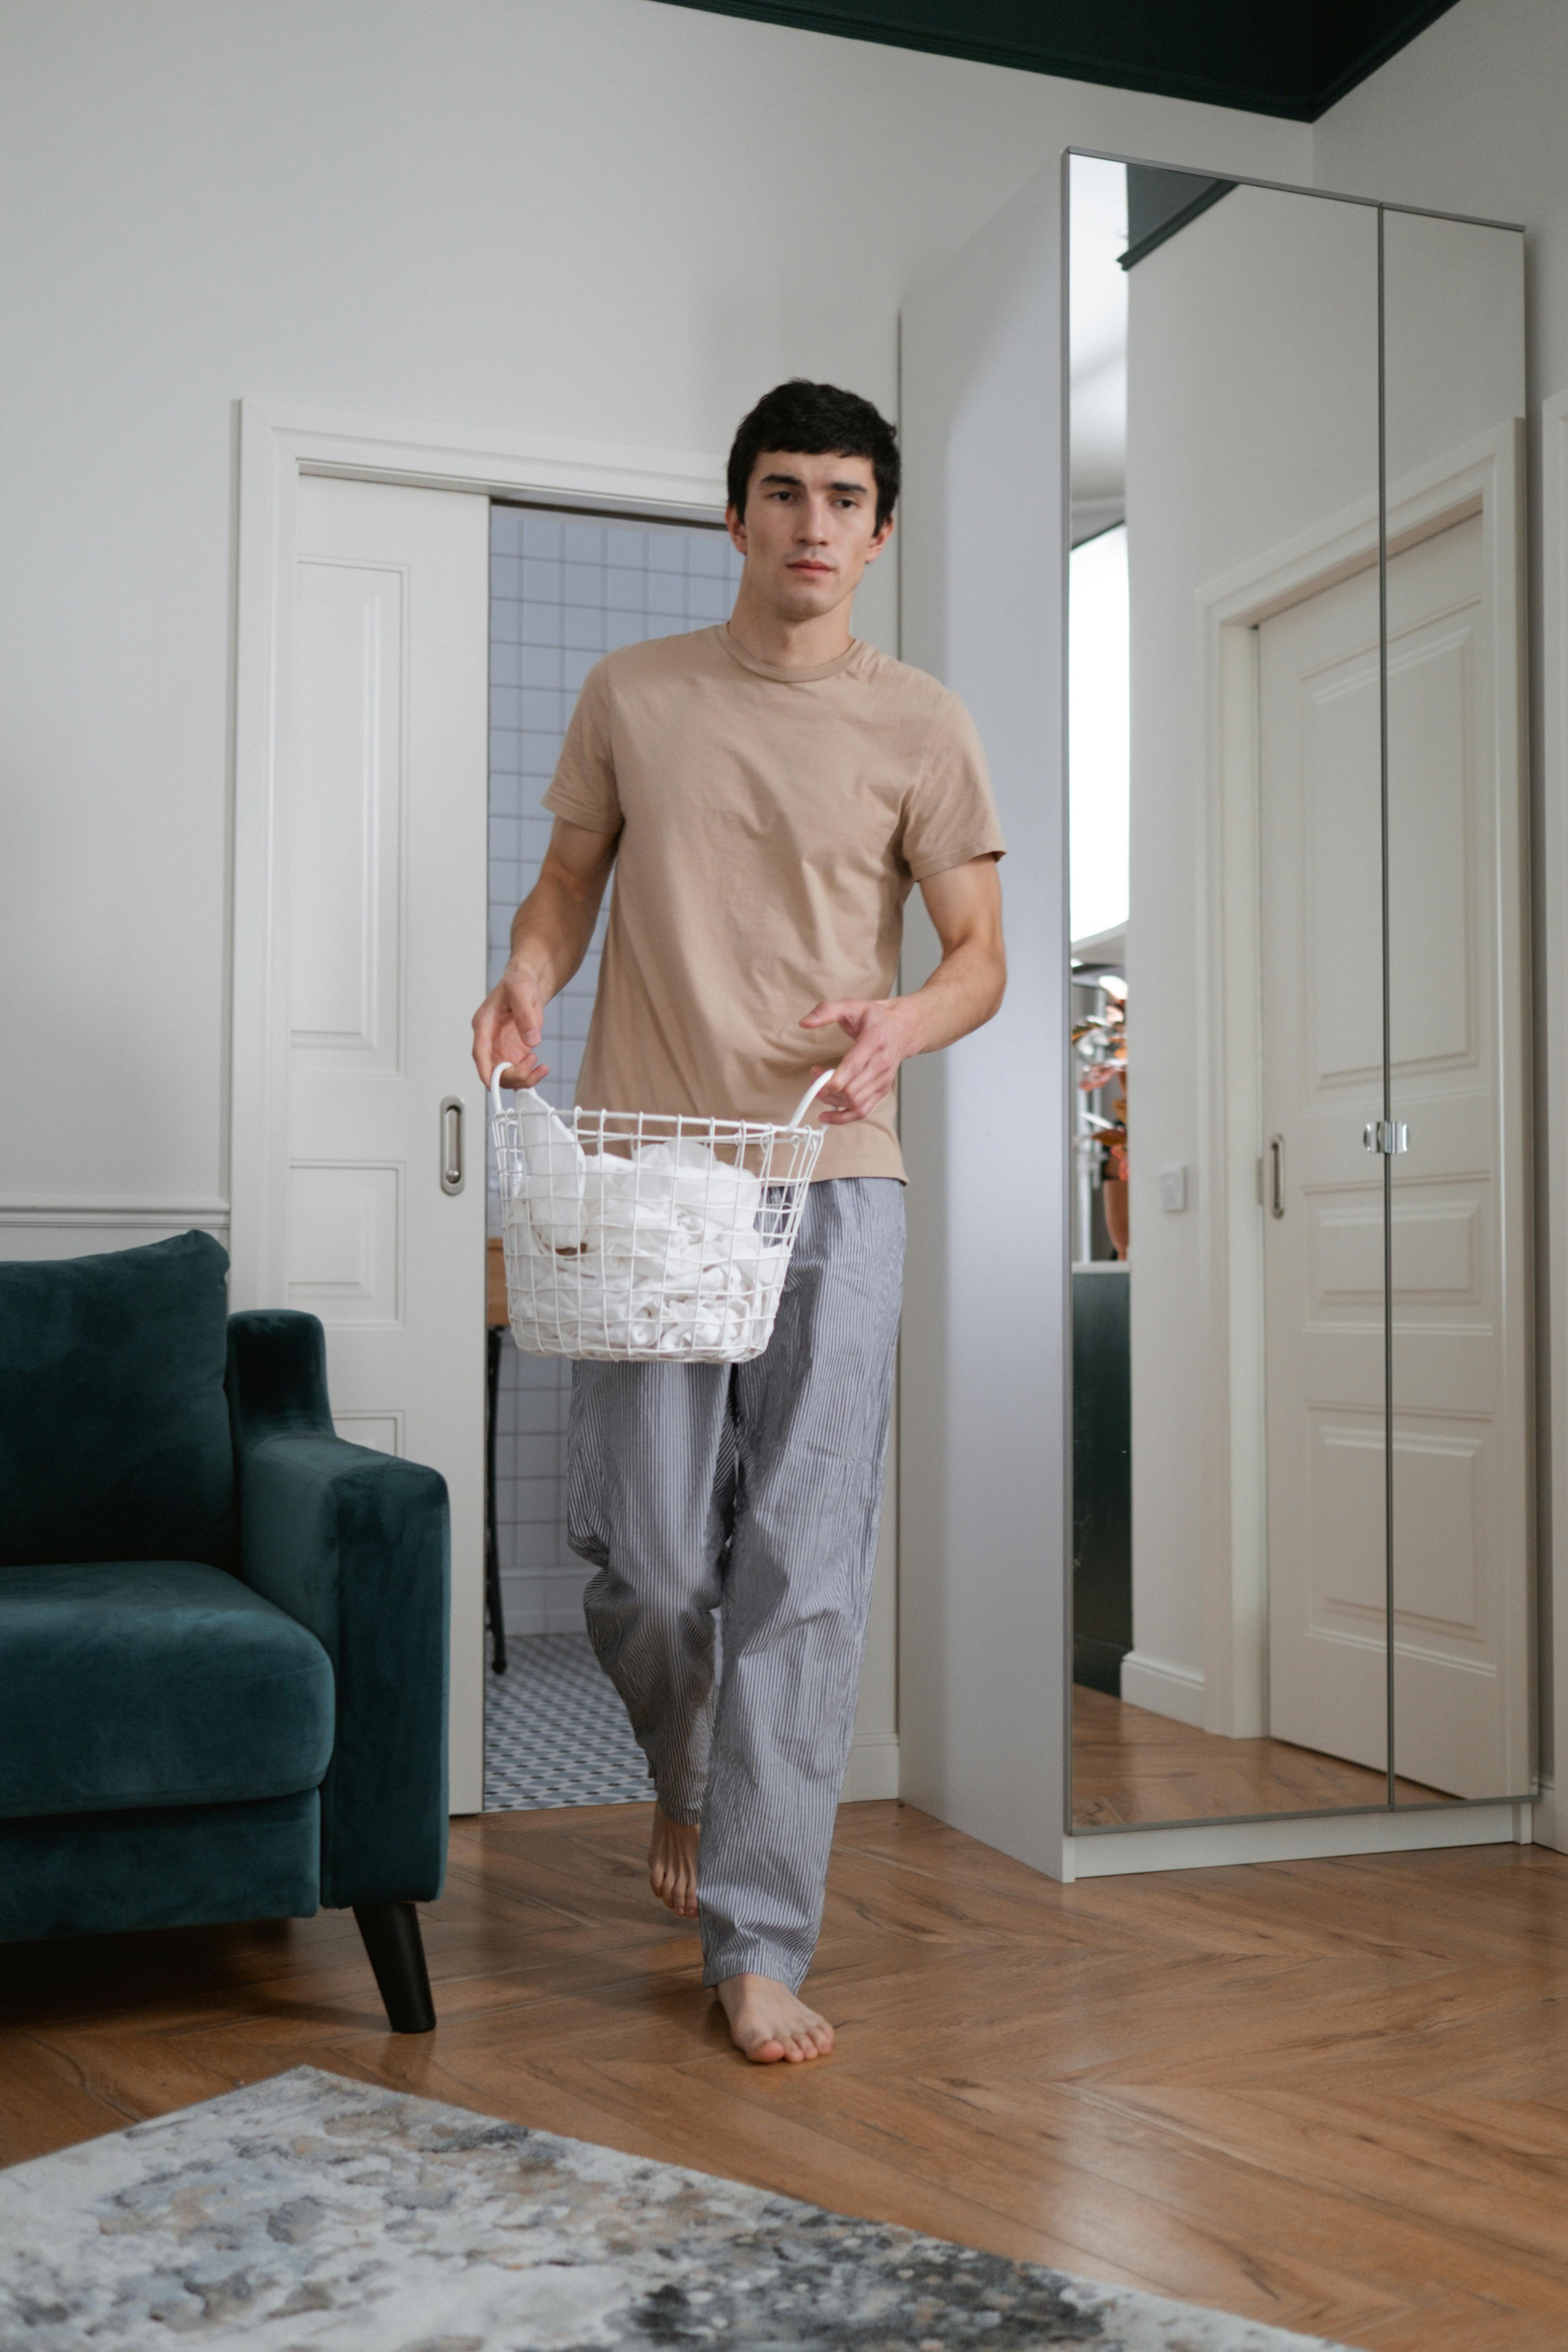 A man holding a laundry basket with clothes | Source: Pexels